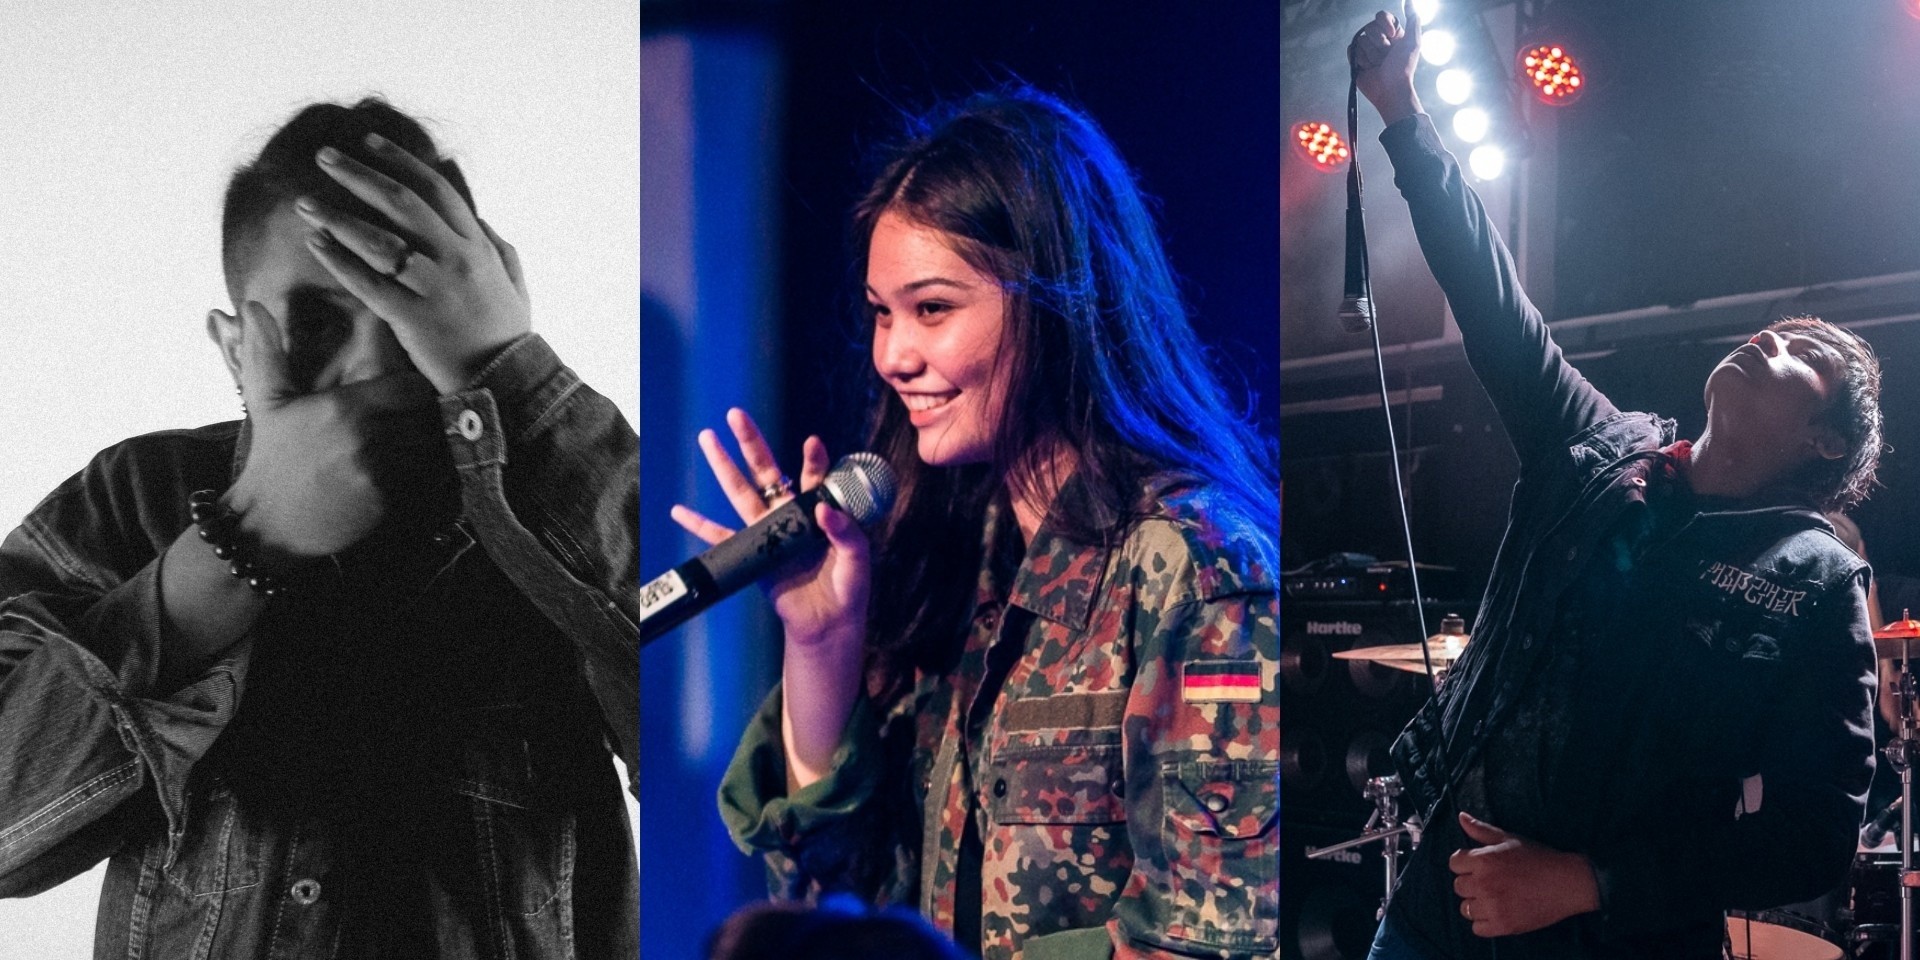 Akeem Jahat, Wormrot, Shye and more to perform at House of Vans